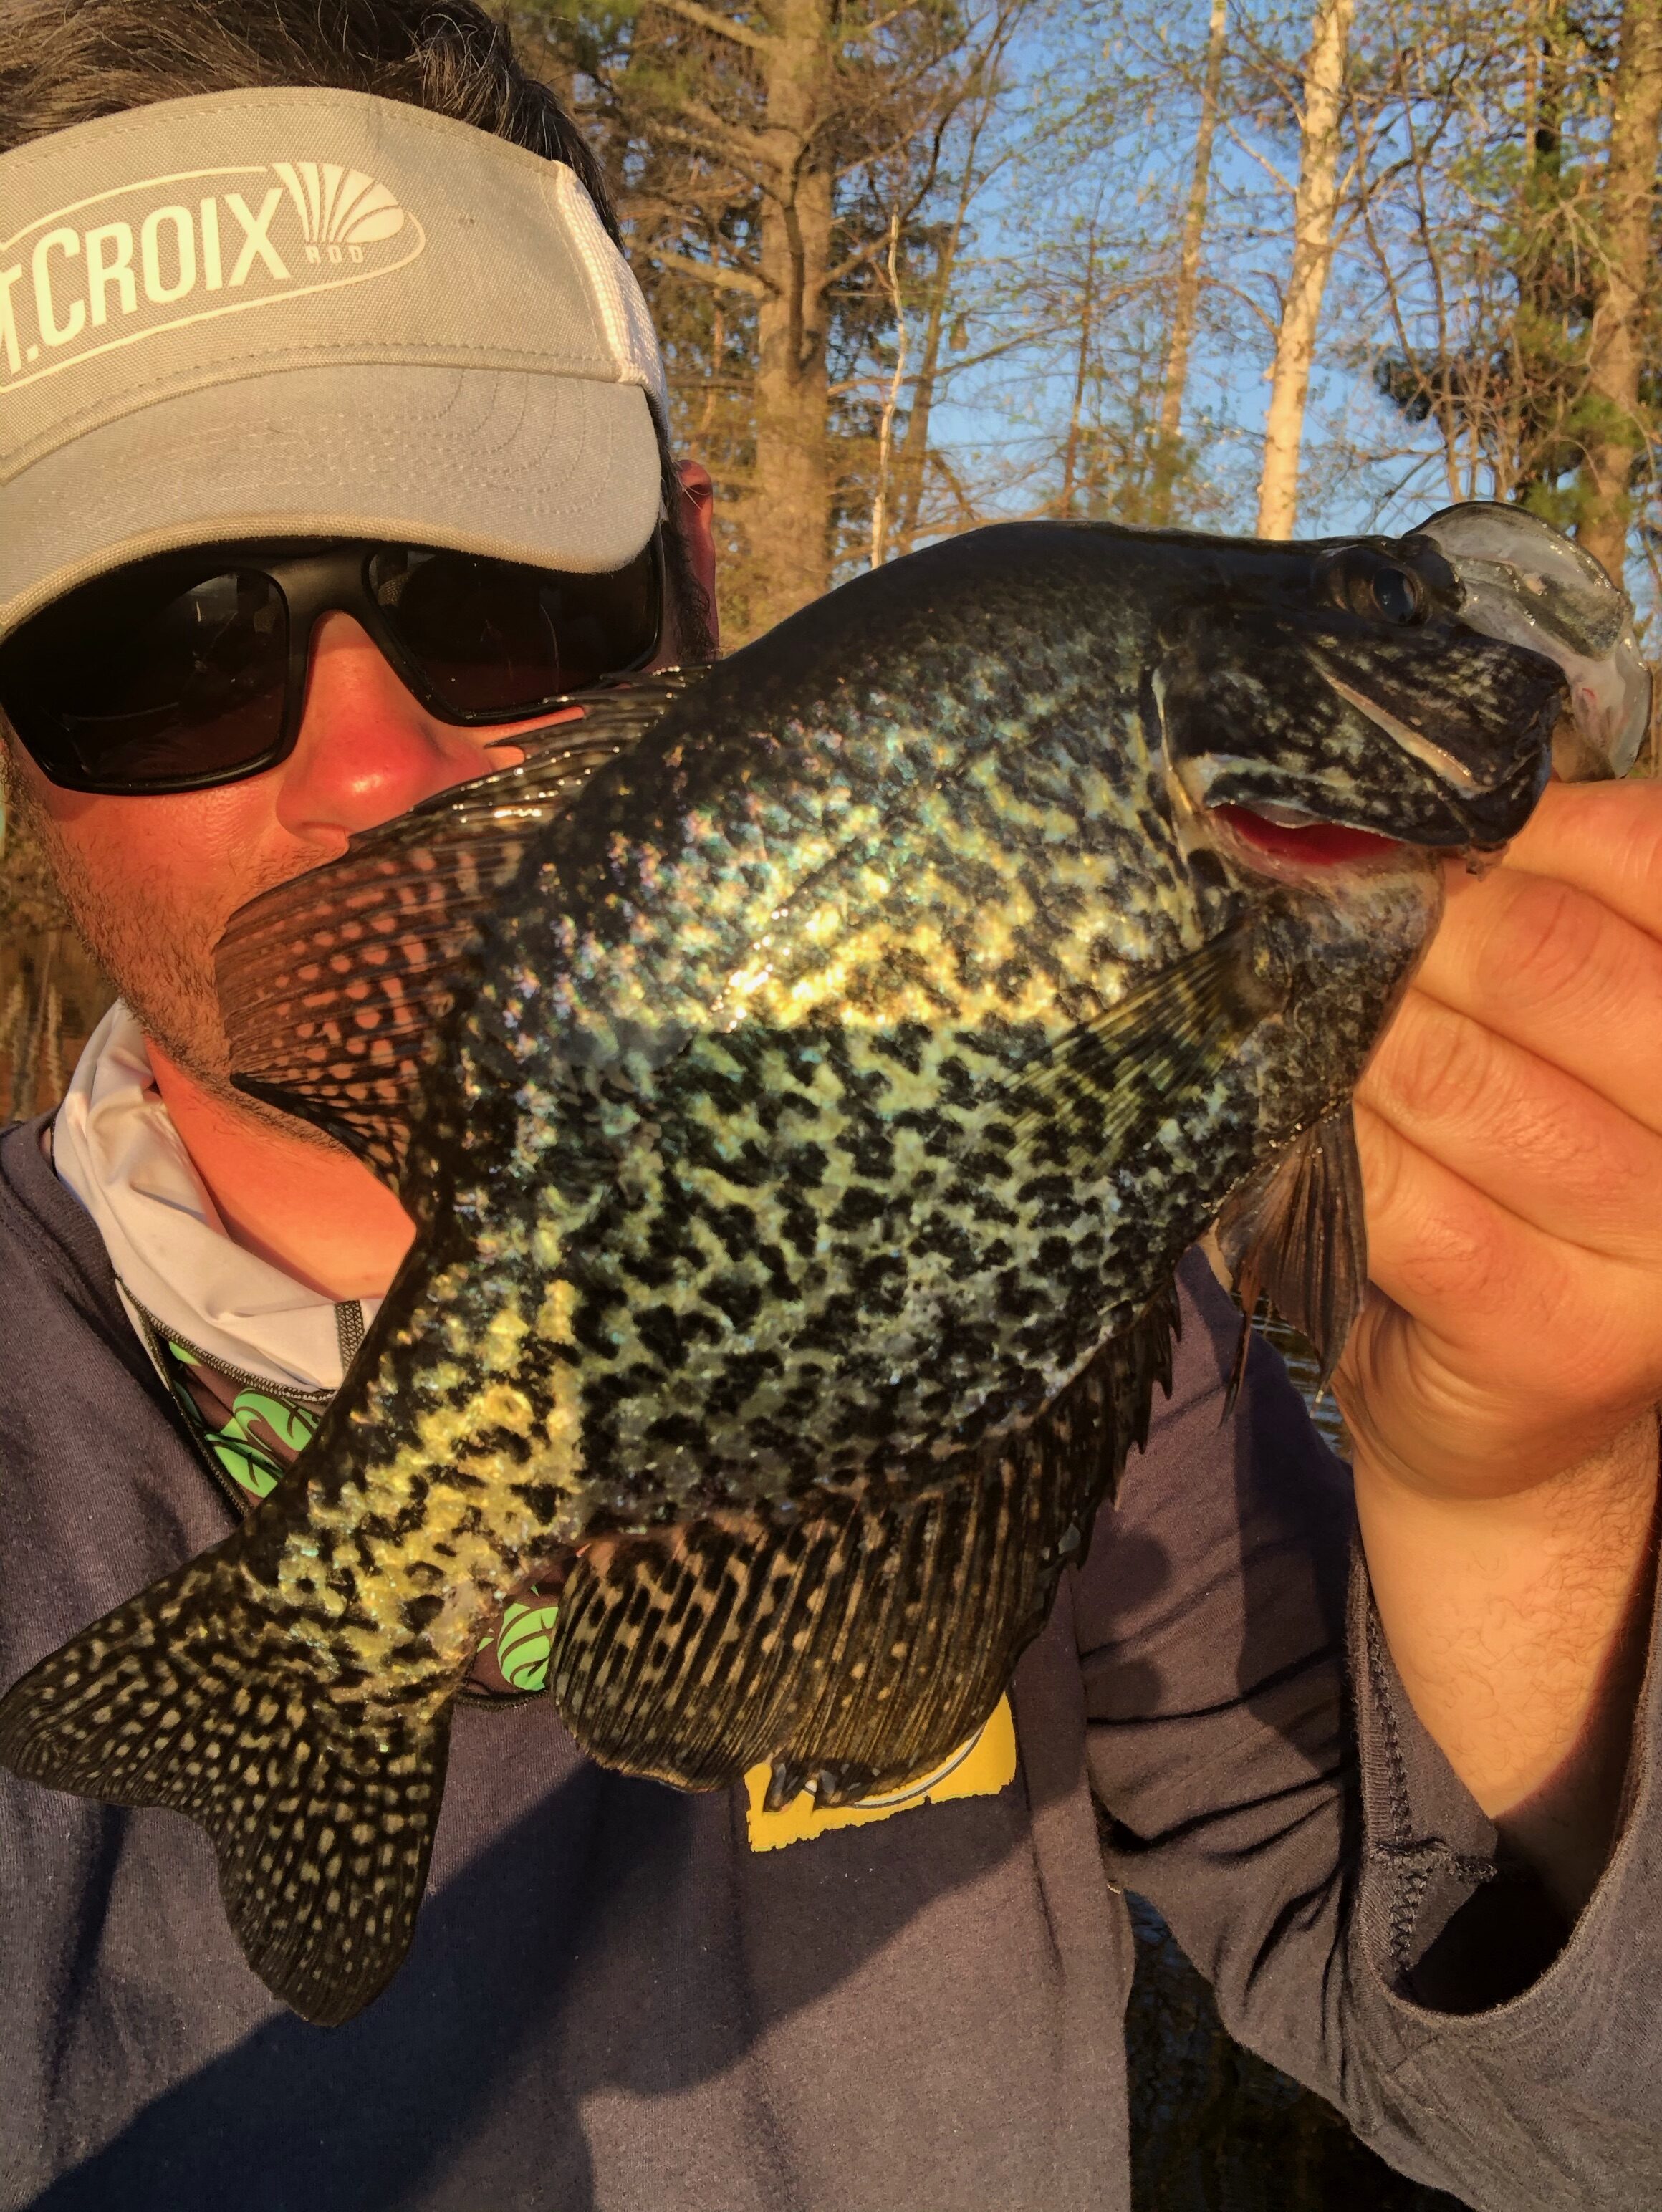 Southern Wisconsin's Early Spring Crappies